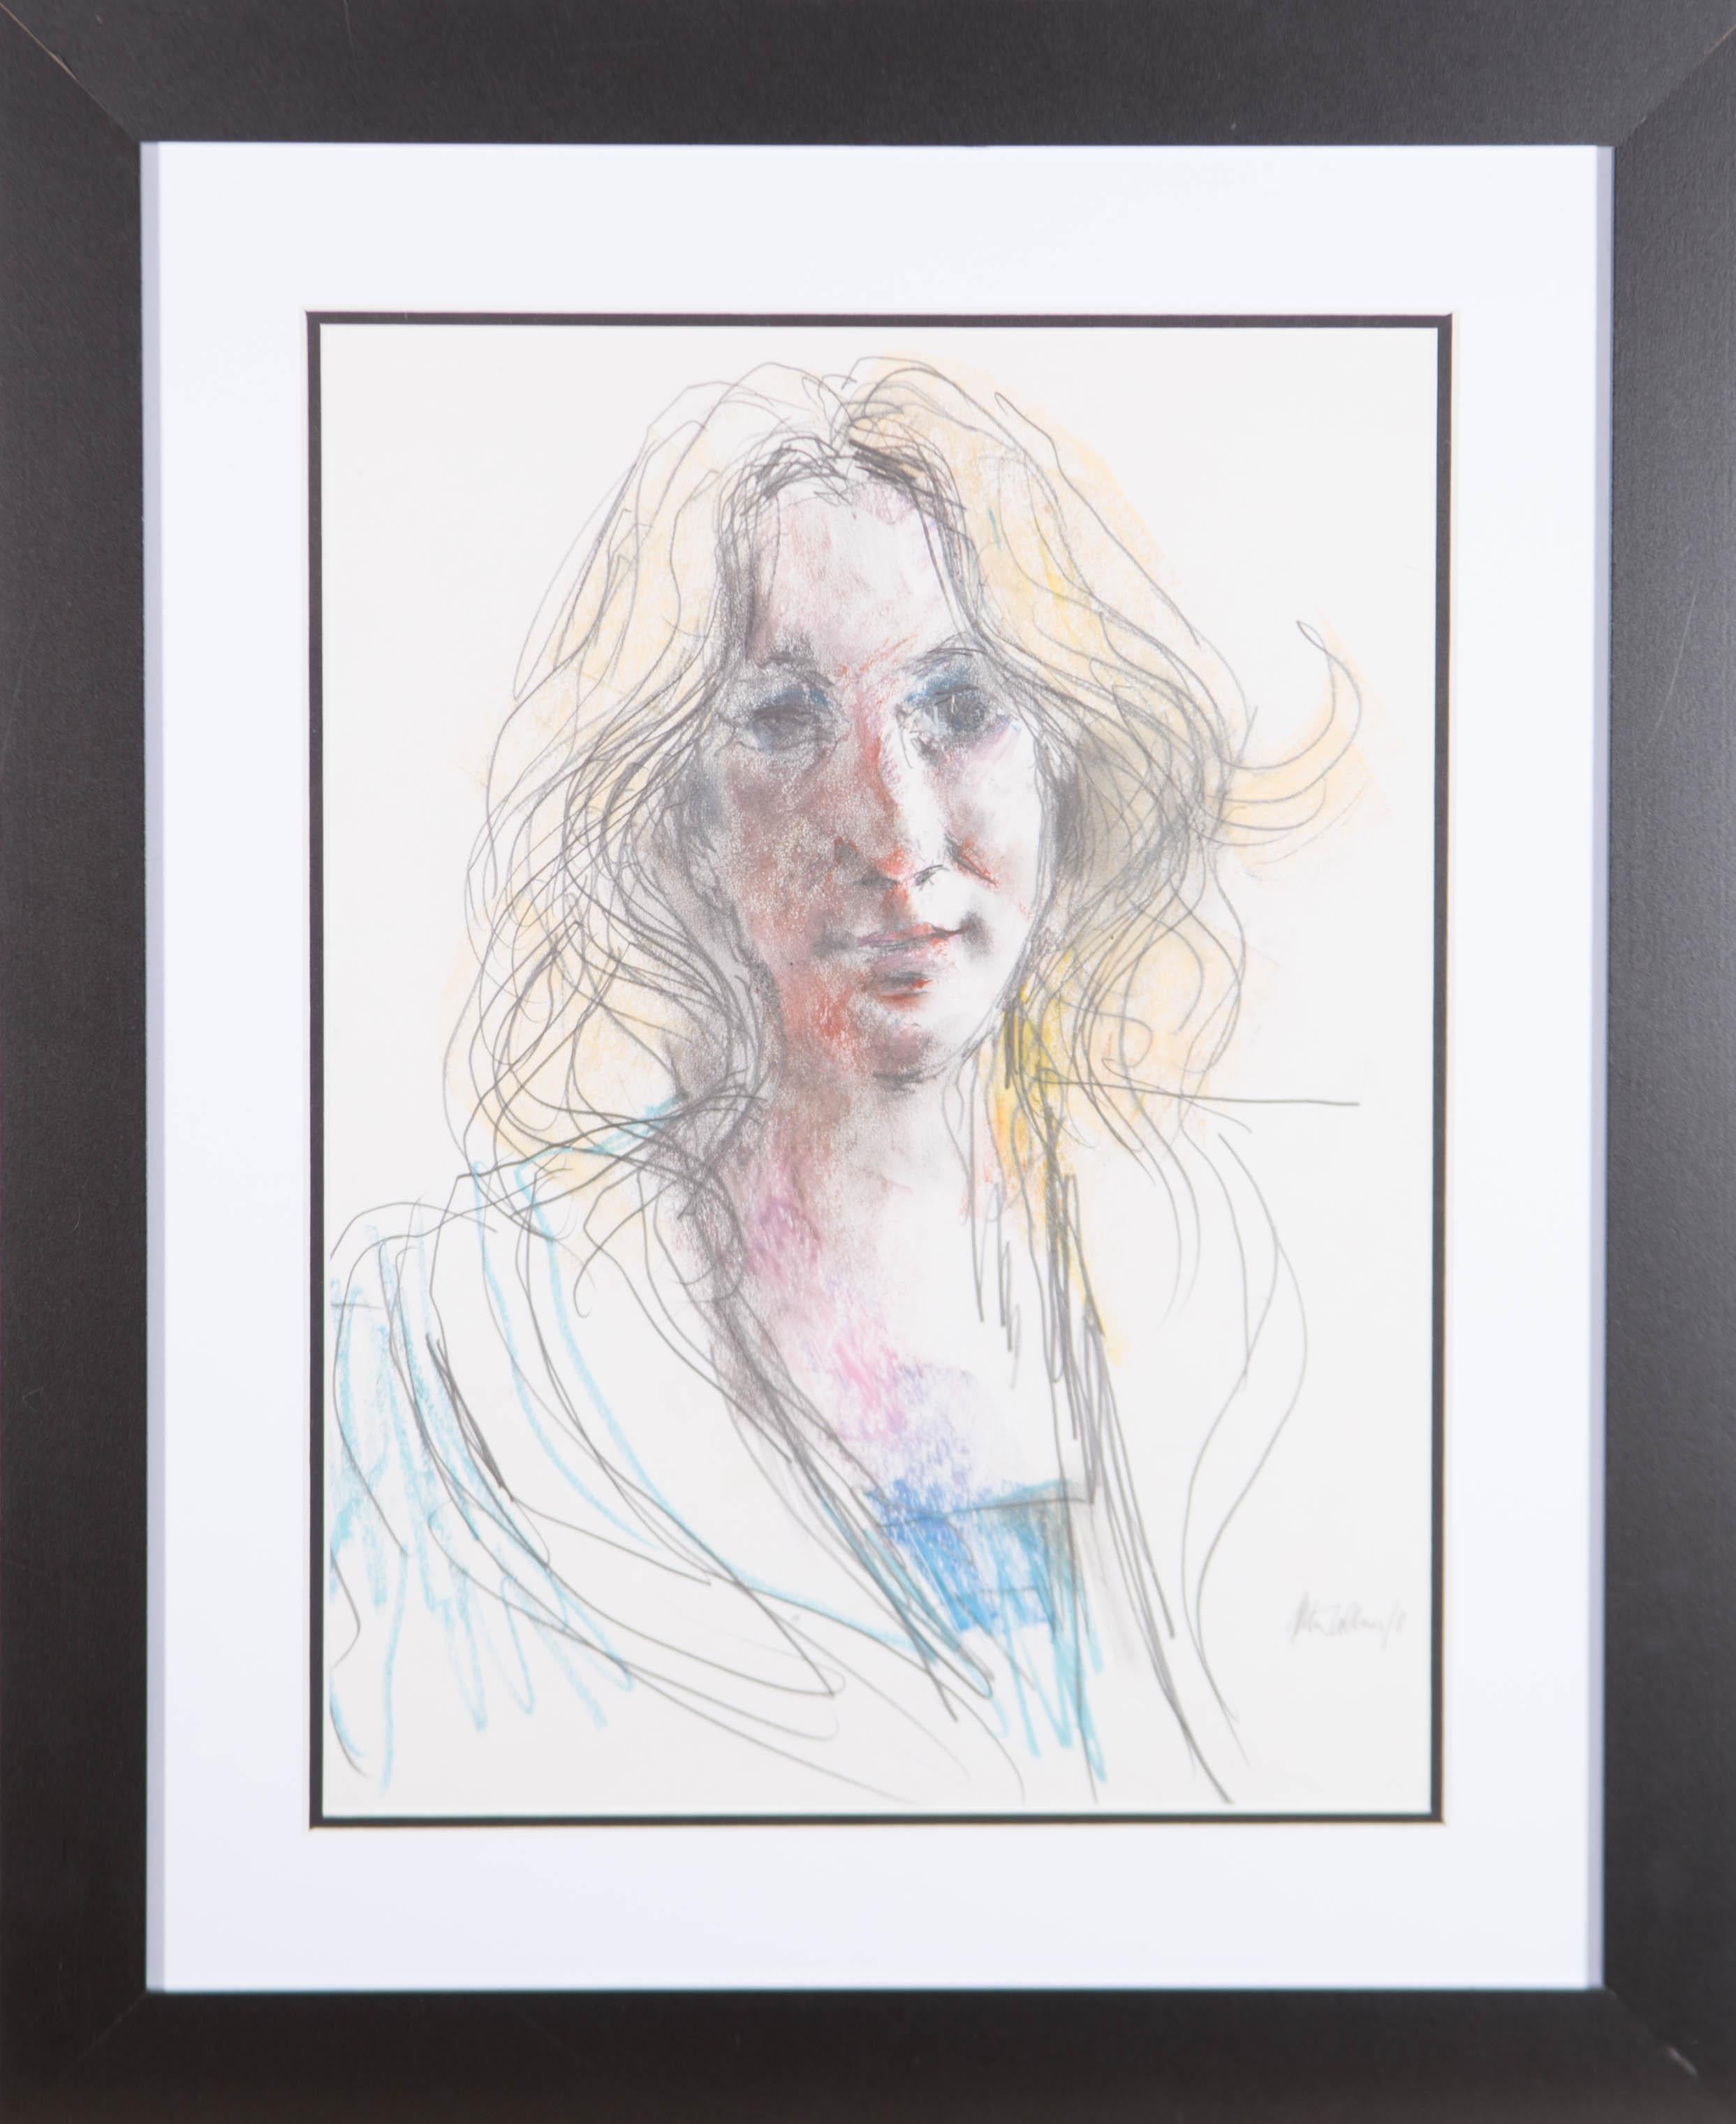 A wonderful portrait of a young woman by the listed British artist Peter Collins. Here he has captured the sitter's effortless beauty with a small number of expressive pencil marks and swatches of oil pastel. Very well presented in a contemporary